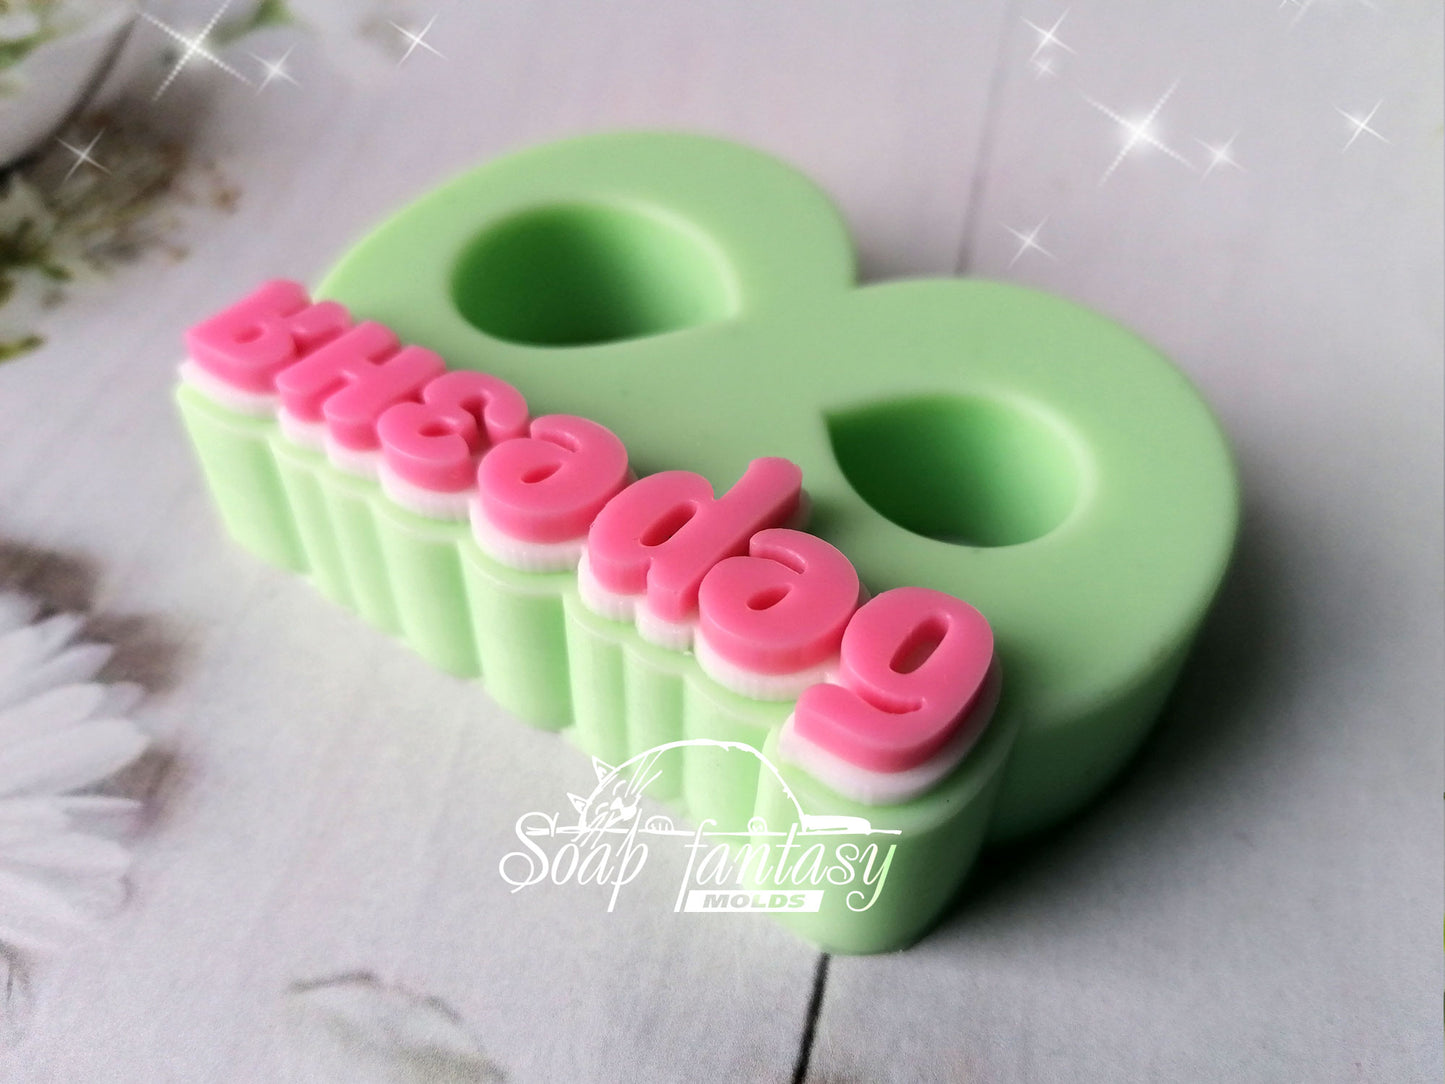 «8 березня» for creativity silicone mold for soap making